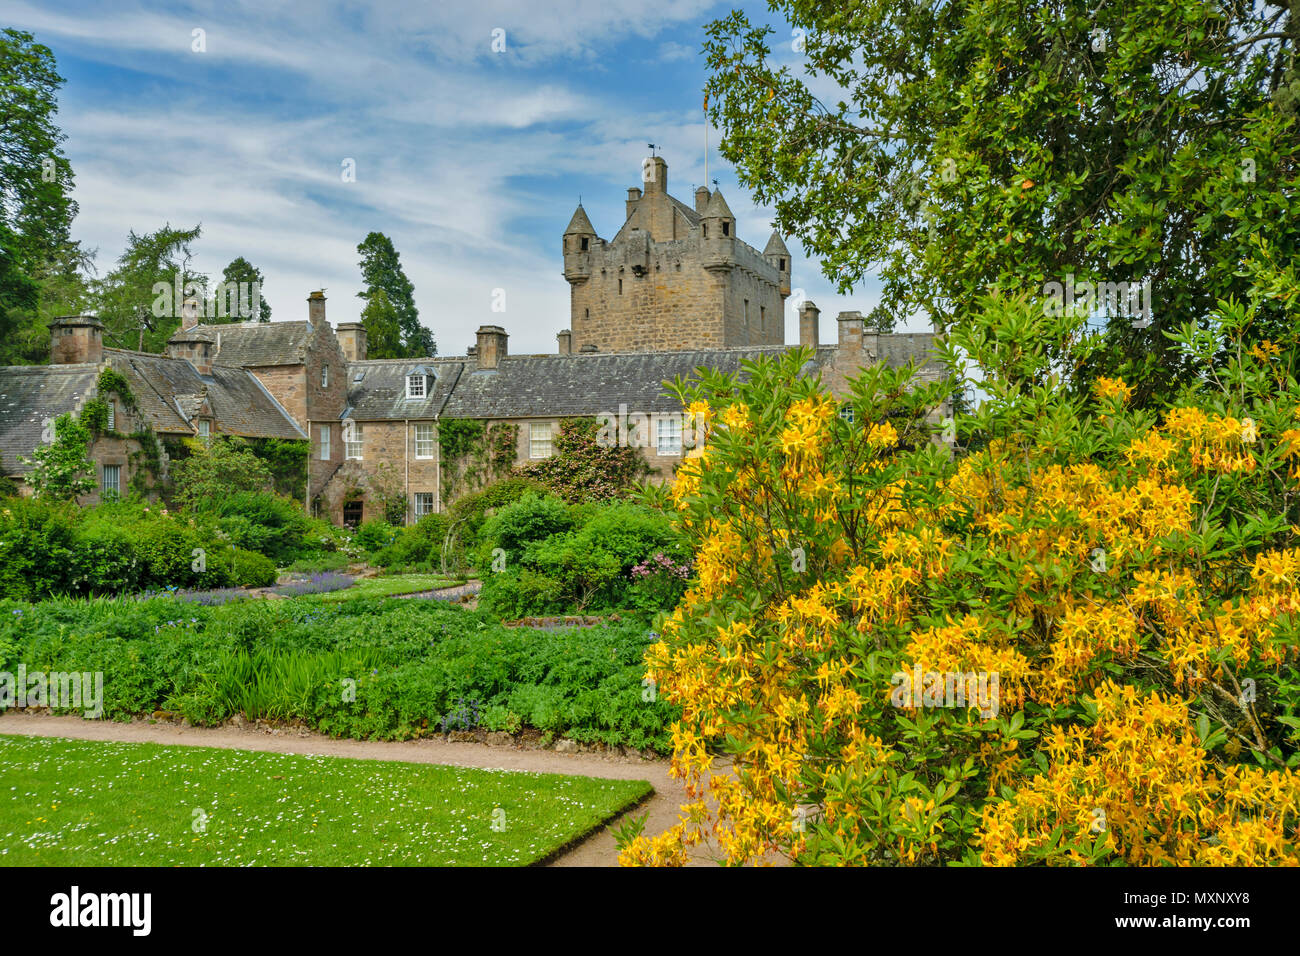 CAWDOR CASTLE NAIRN SCOTLAND GARDEN THE BUILDING AND TOWER WITH YELLOW AZALEA FLOWERS Stock Photo